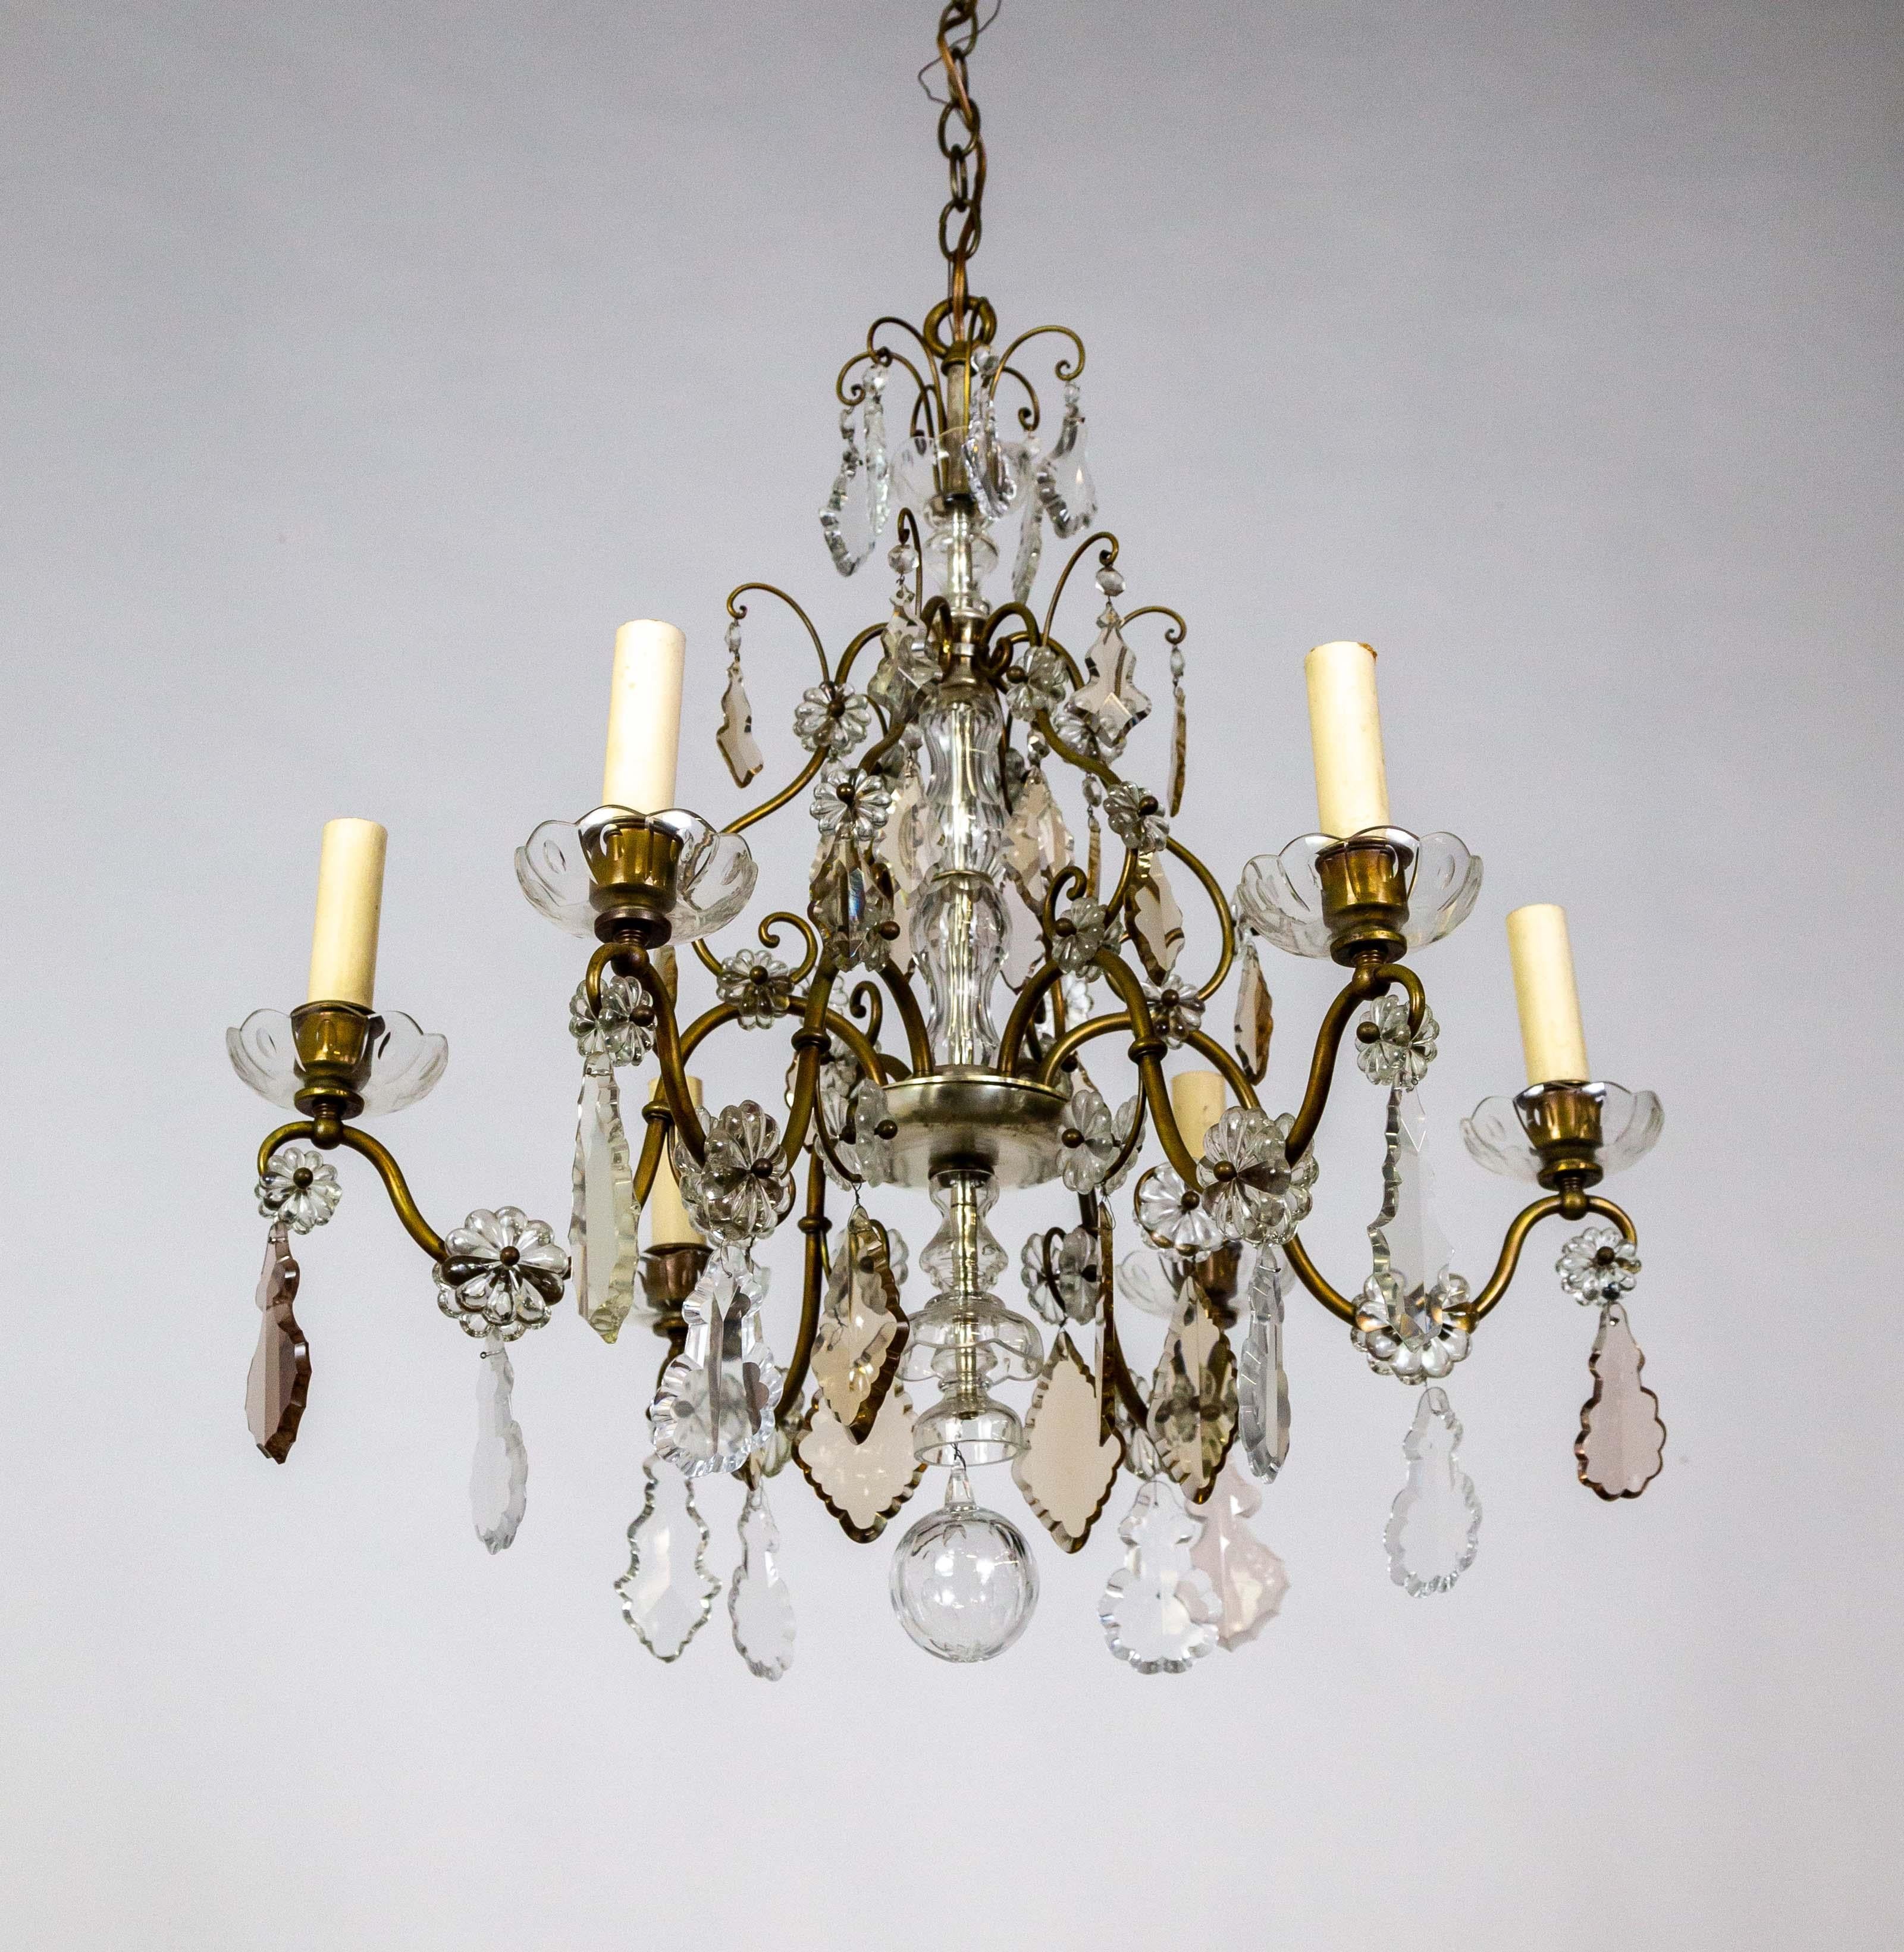 A curling-armed, brass, candlestick style chandelier. The large, finely cut, pendeloque, and scalloped diamond crystals are clear and smoke rose and amber. The brass arms are accented with rosette crystals and a silver-gilt dish body with crystal